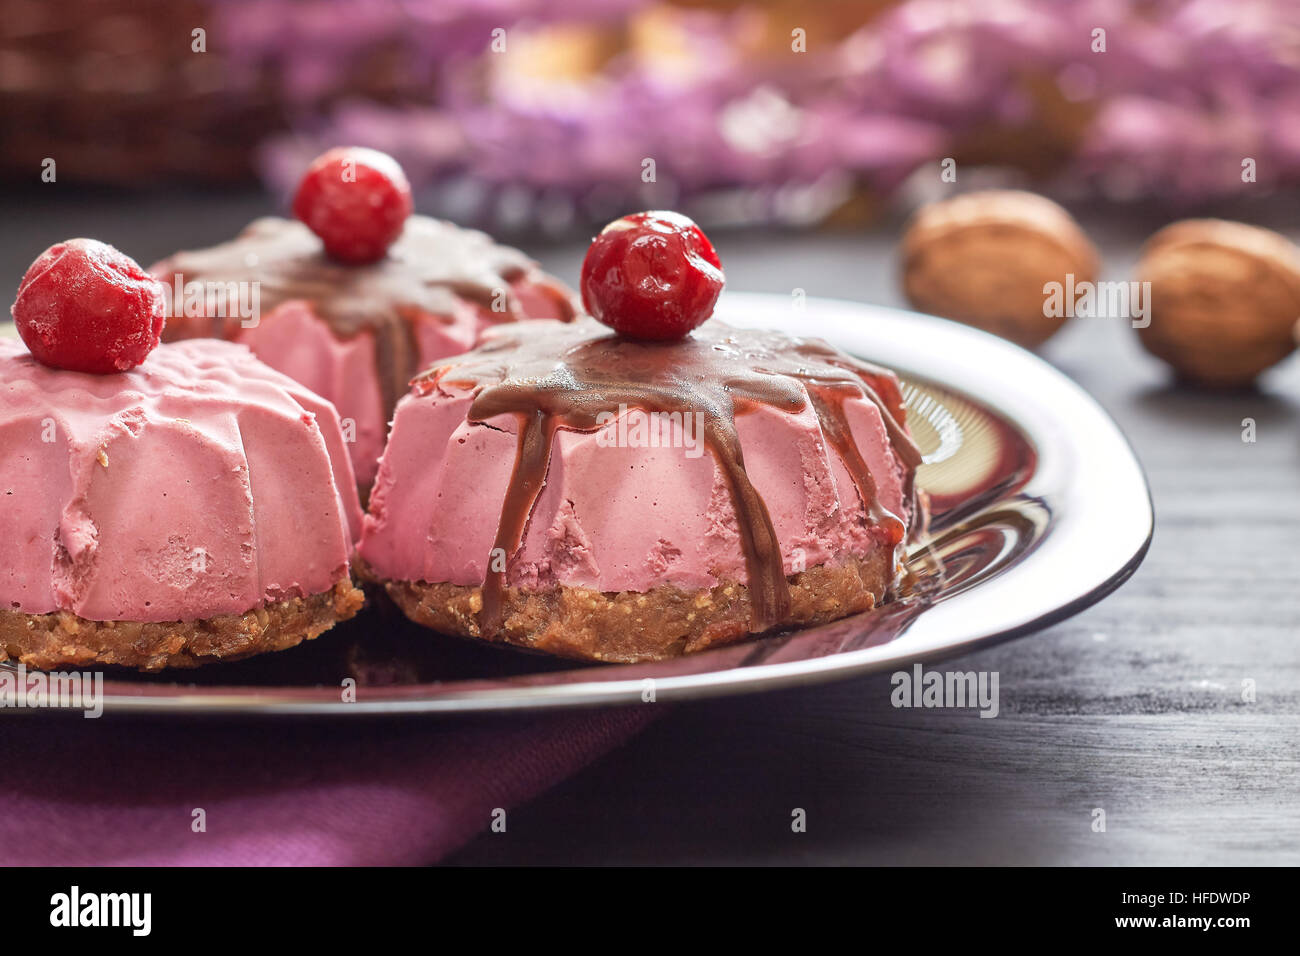 Raw vegan dessert made with sour cherry, dates and walnuts served on black plate Stock Photo